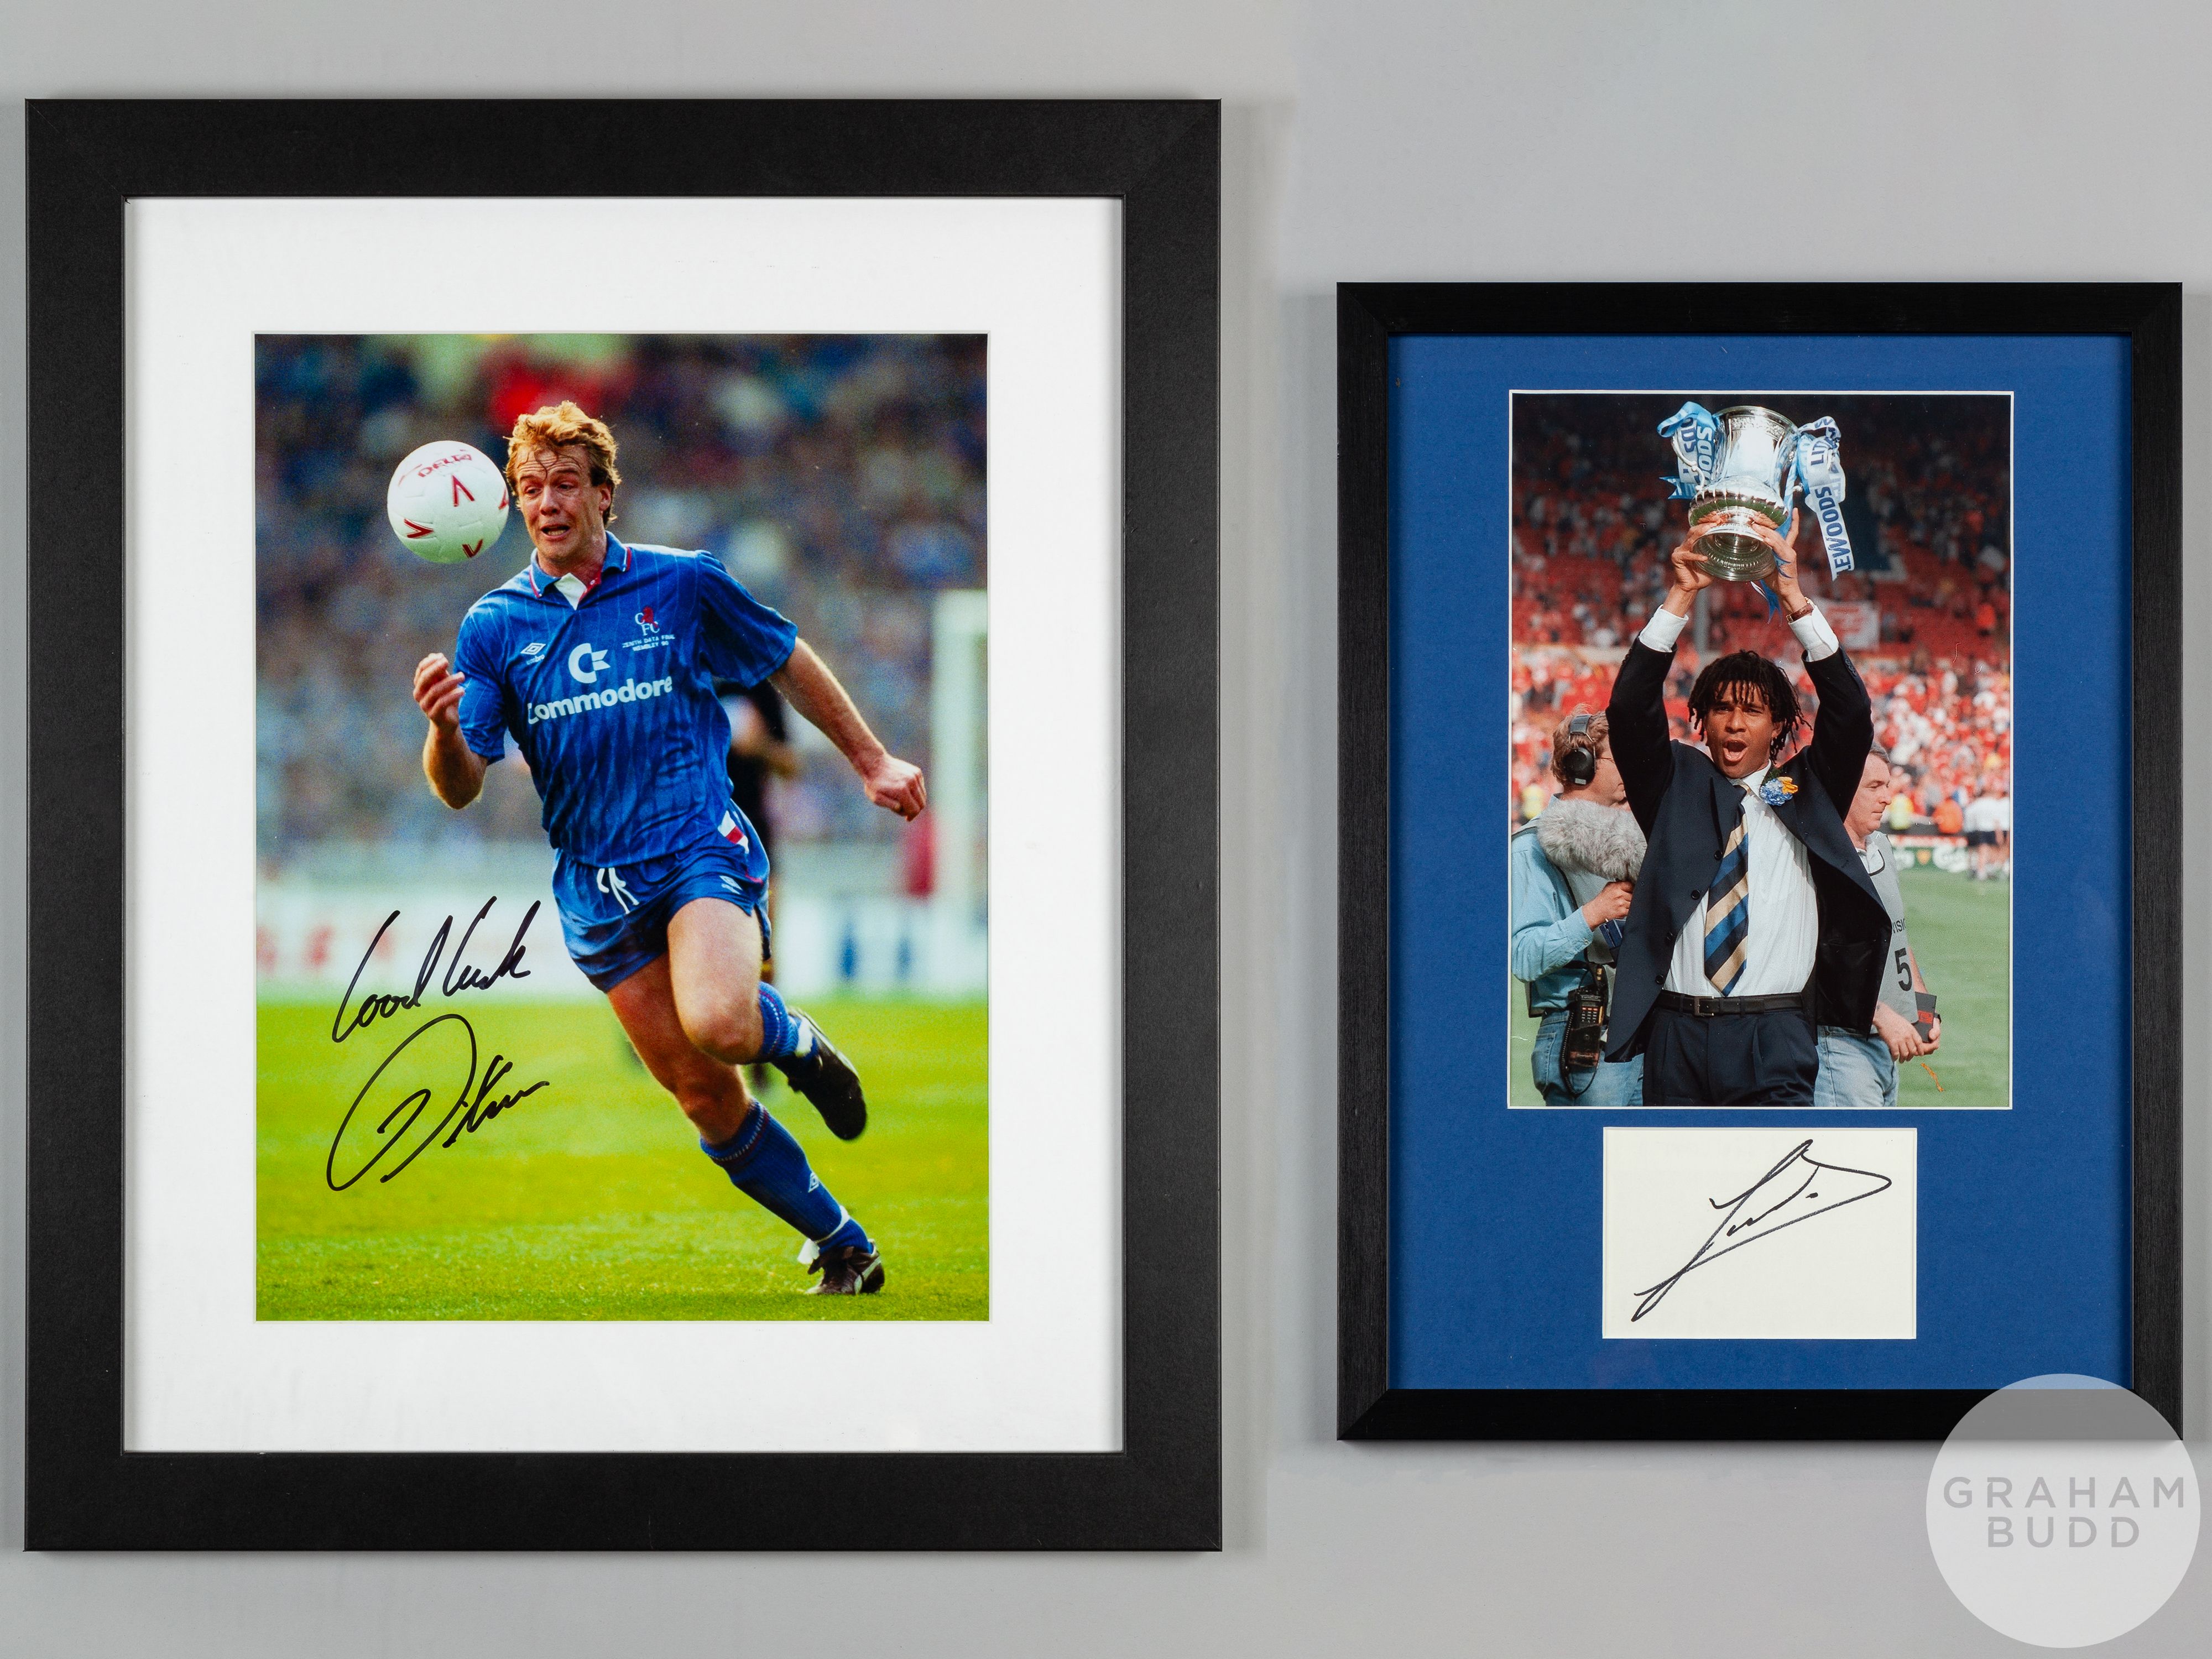 Ruud Gullit and Kerry Dixon: pair of Chelsea legends at Wembley signed framed photographic displays,